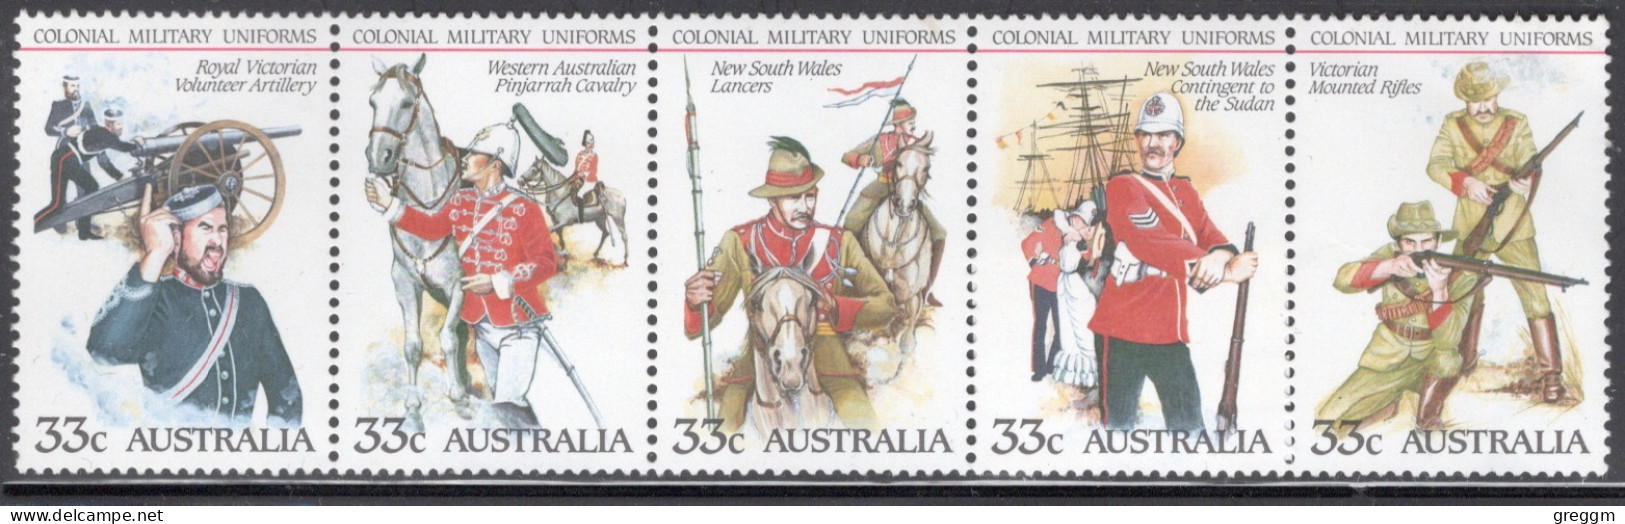 Australia 1985 Set Of Stamps To Celebrate Colonial Military Uniforms In Unmounted Mint - Ongebruikt